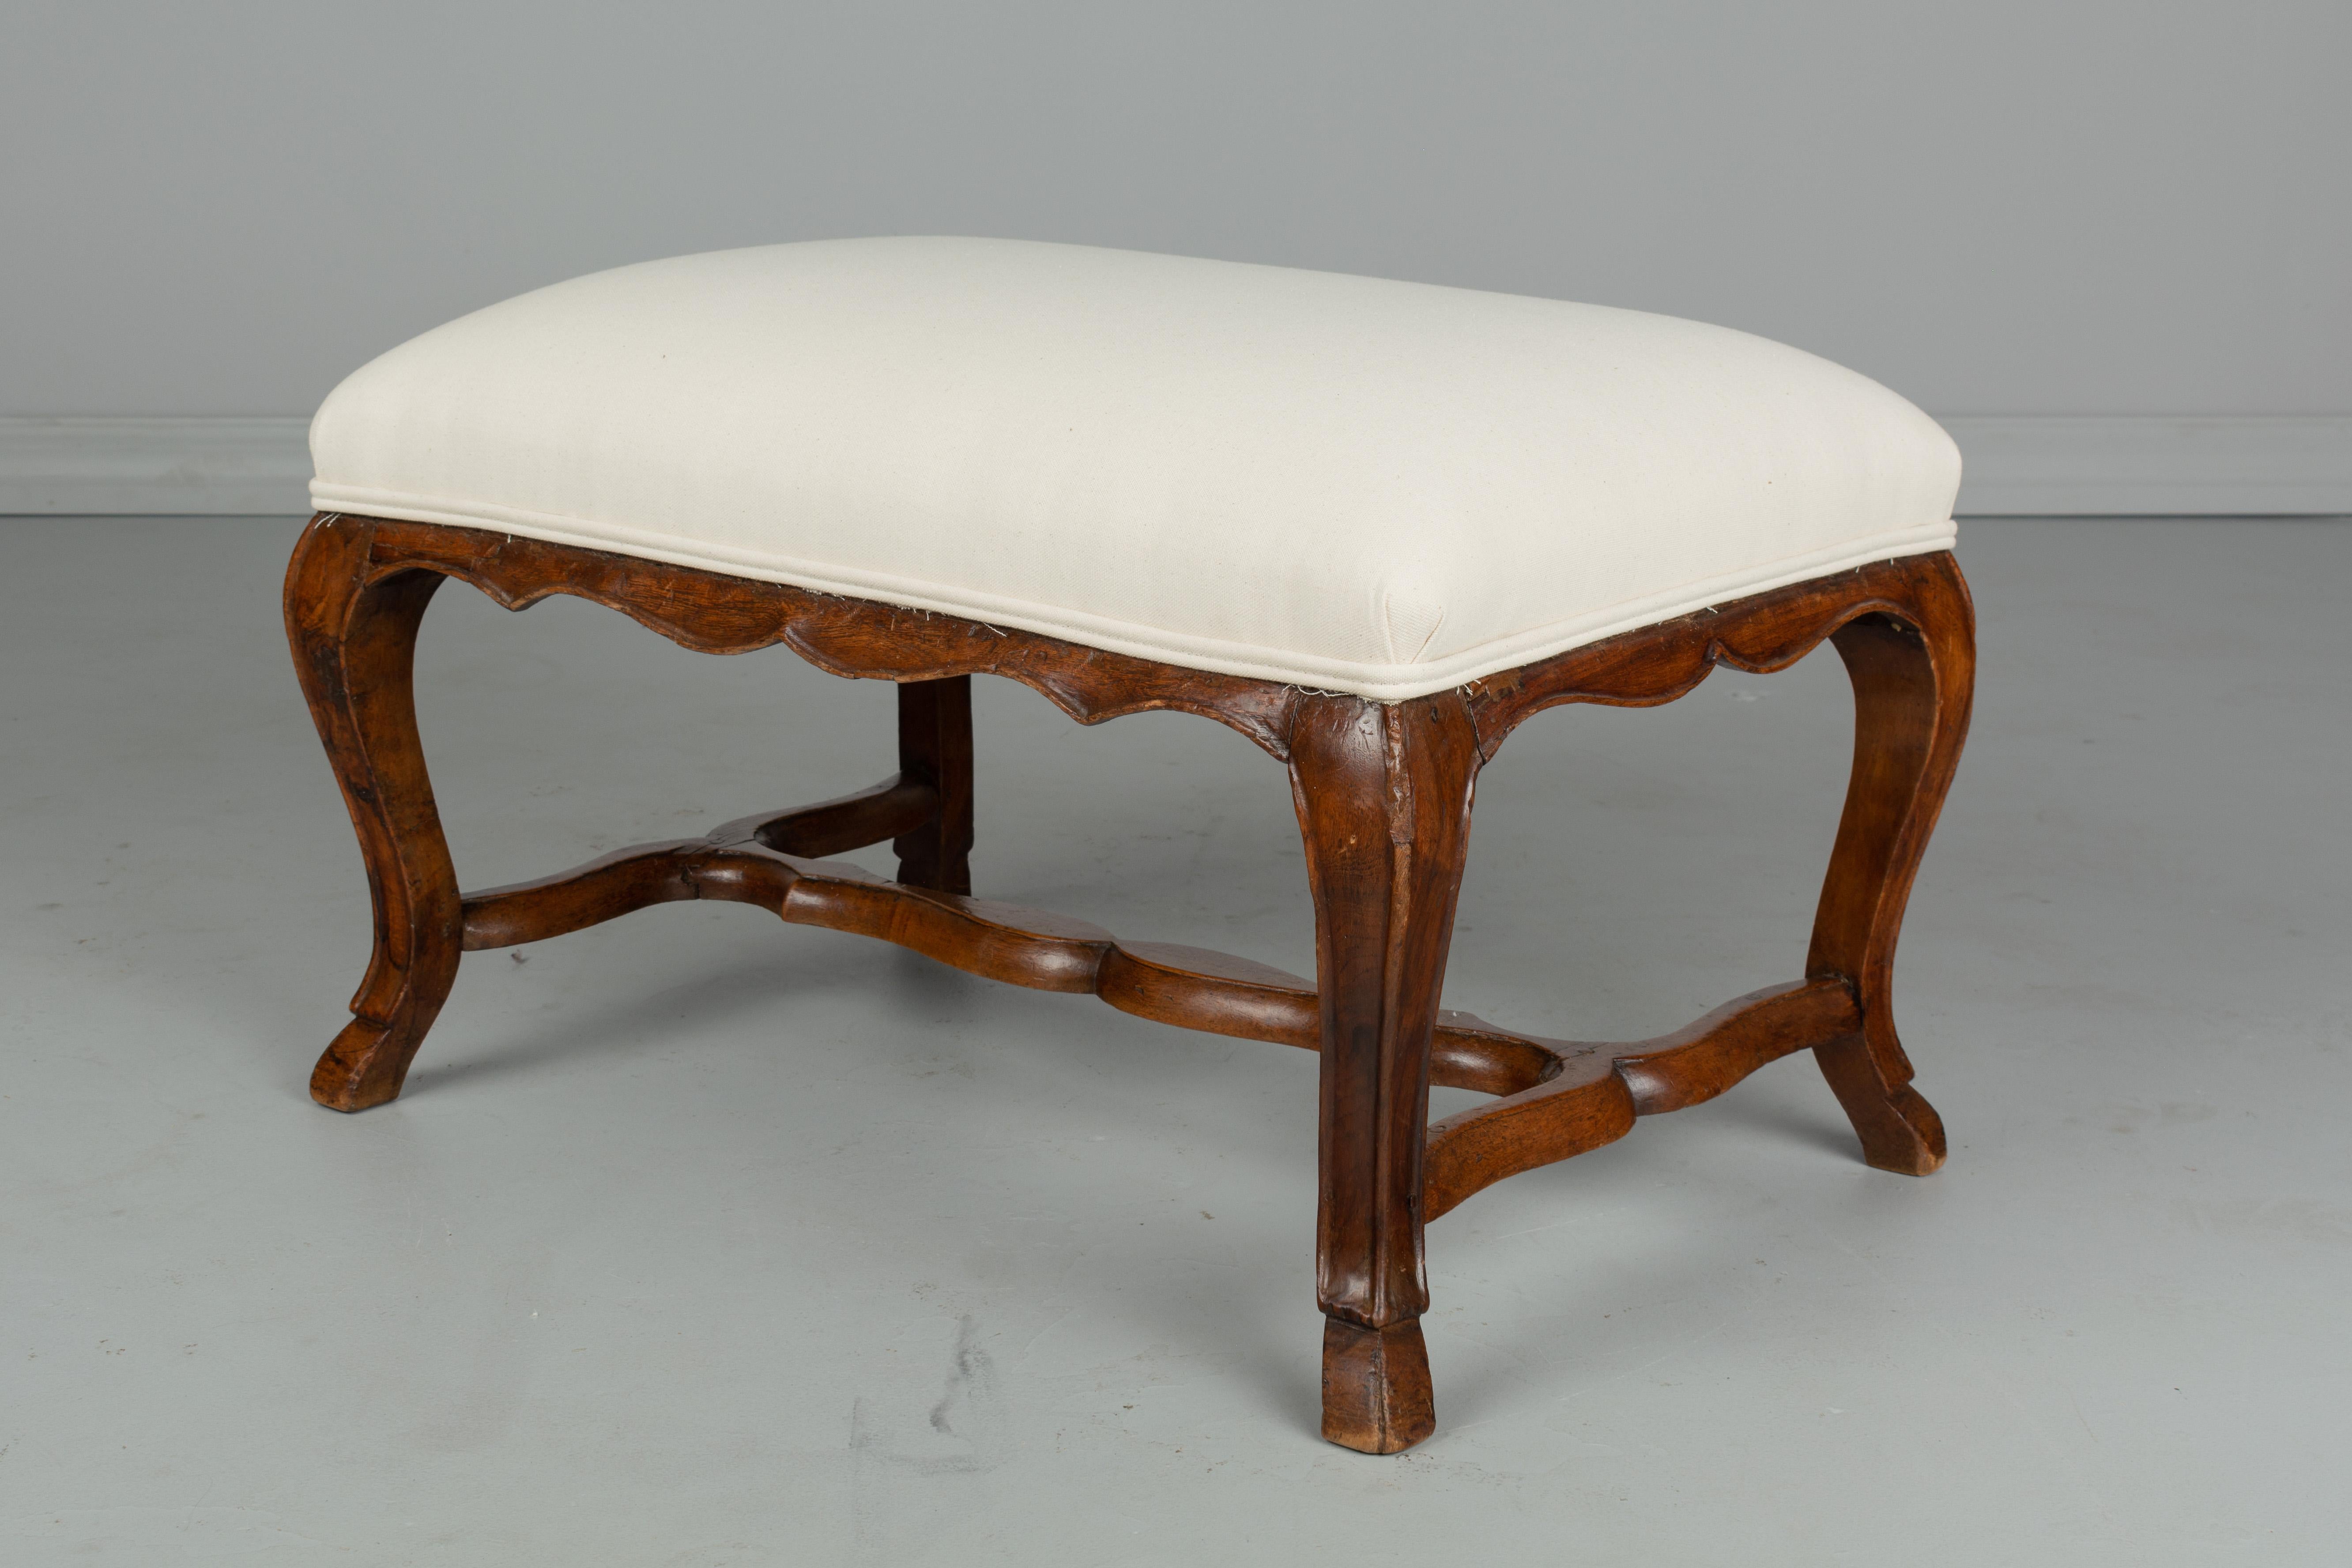 An 18th century French Louis XV style low foot stool made of solid walnut with elegant curved legs and stretcher. Newly reupholstered.
 